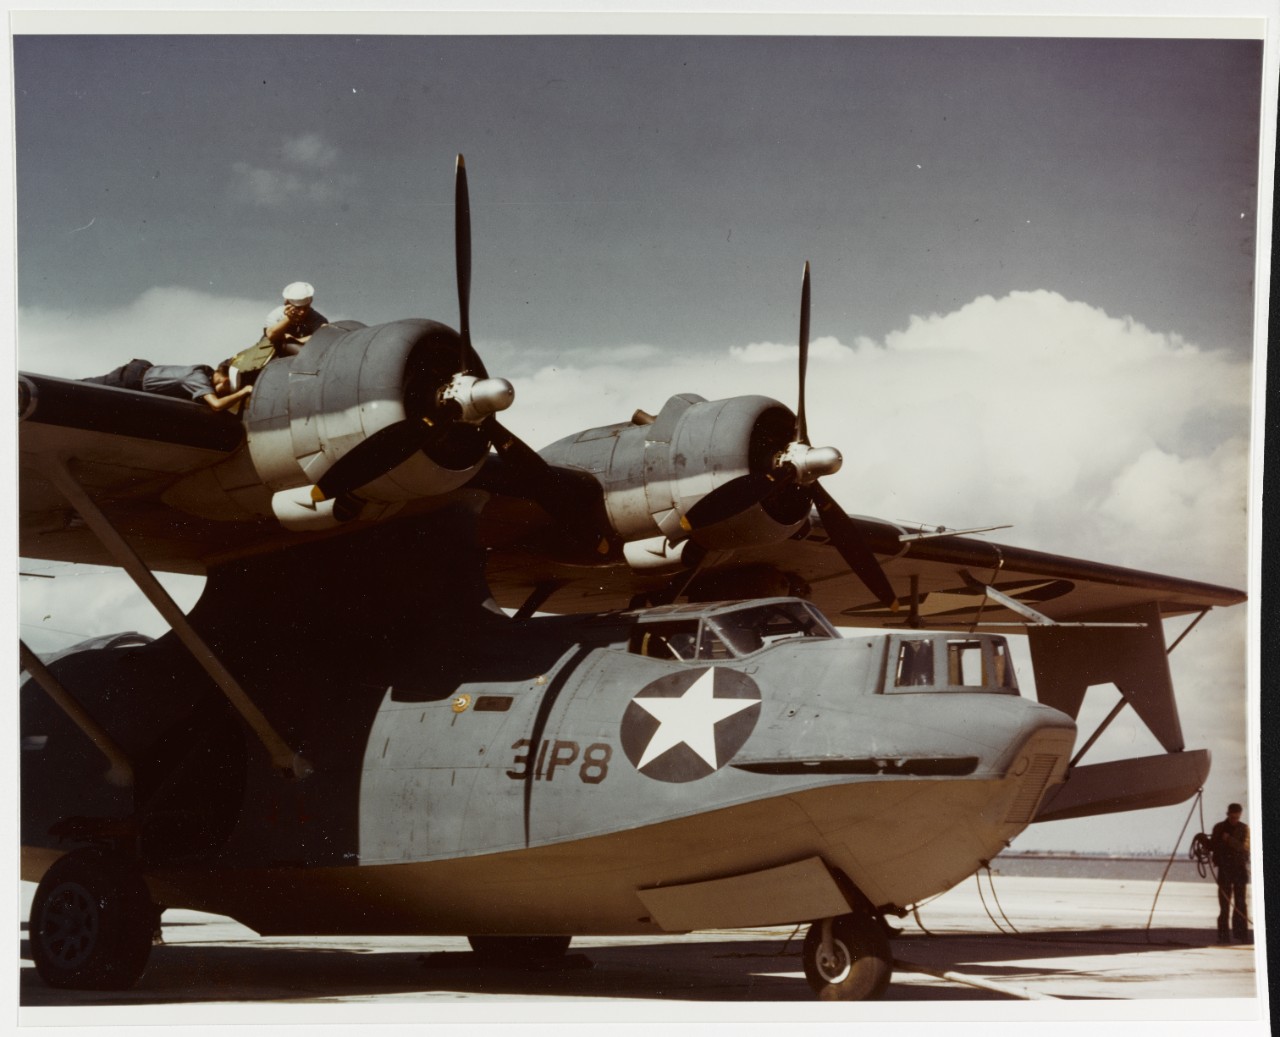 Consolidated PBY-5A "Catalina" patrol bomber